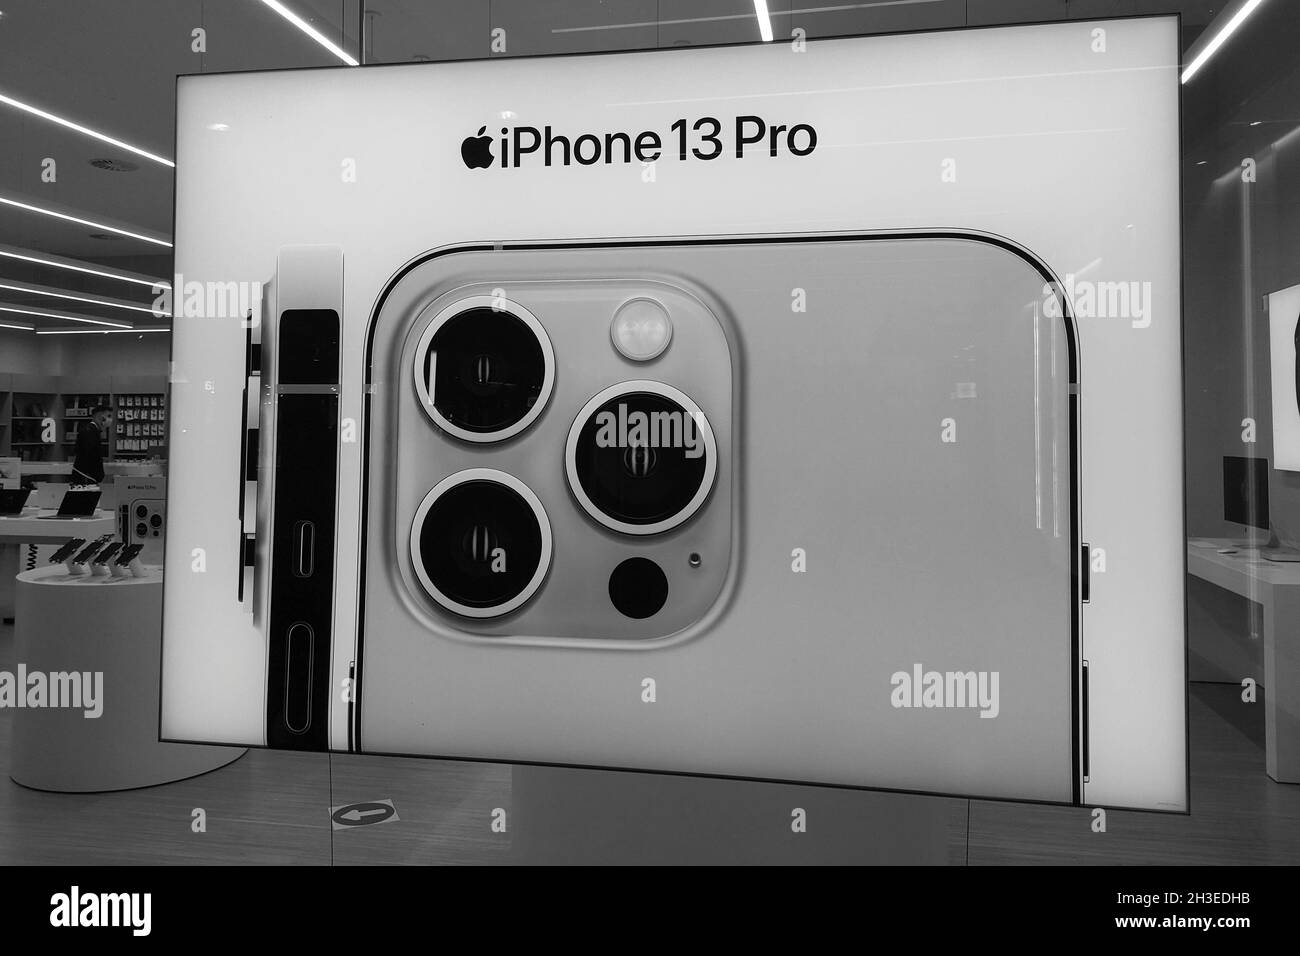 Iphone 13 Pro advertisement in a Rossellimac shop in Malaga, Andalusia, Spain. Stock Photo